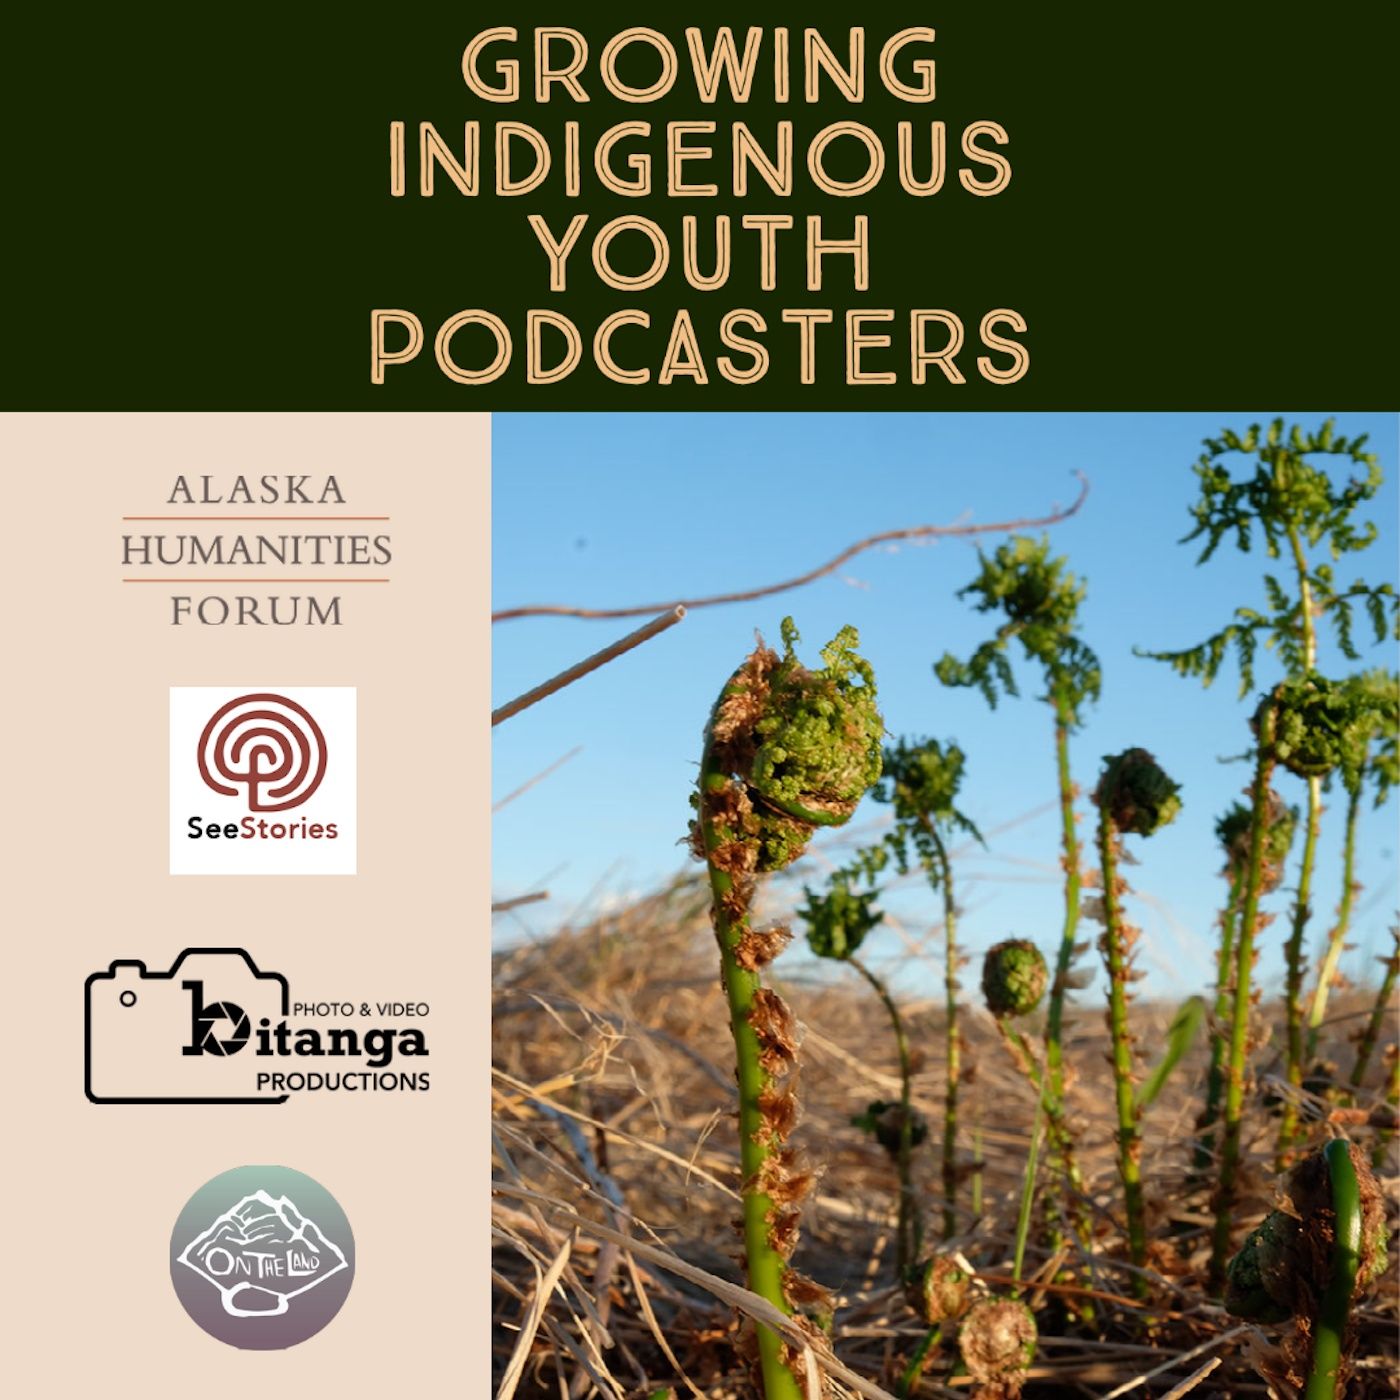 Jessica Chingliak: Growing Indigenous Youth Podcasters